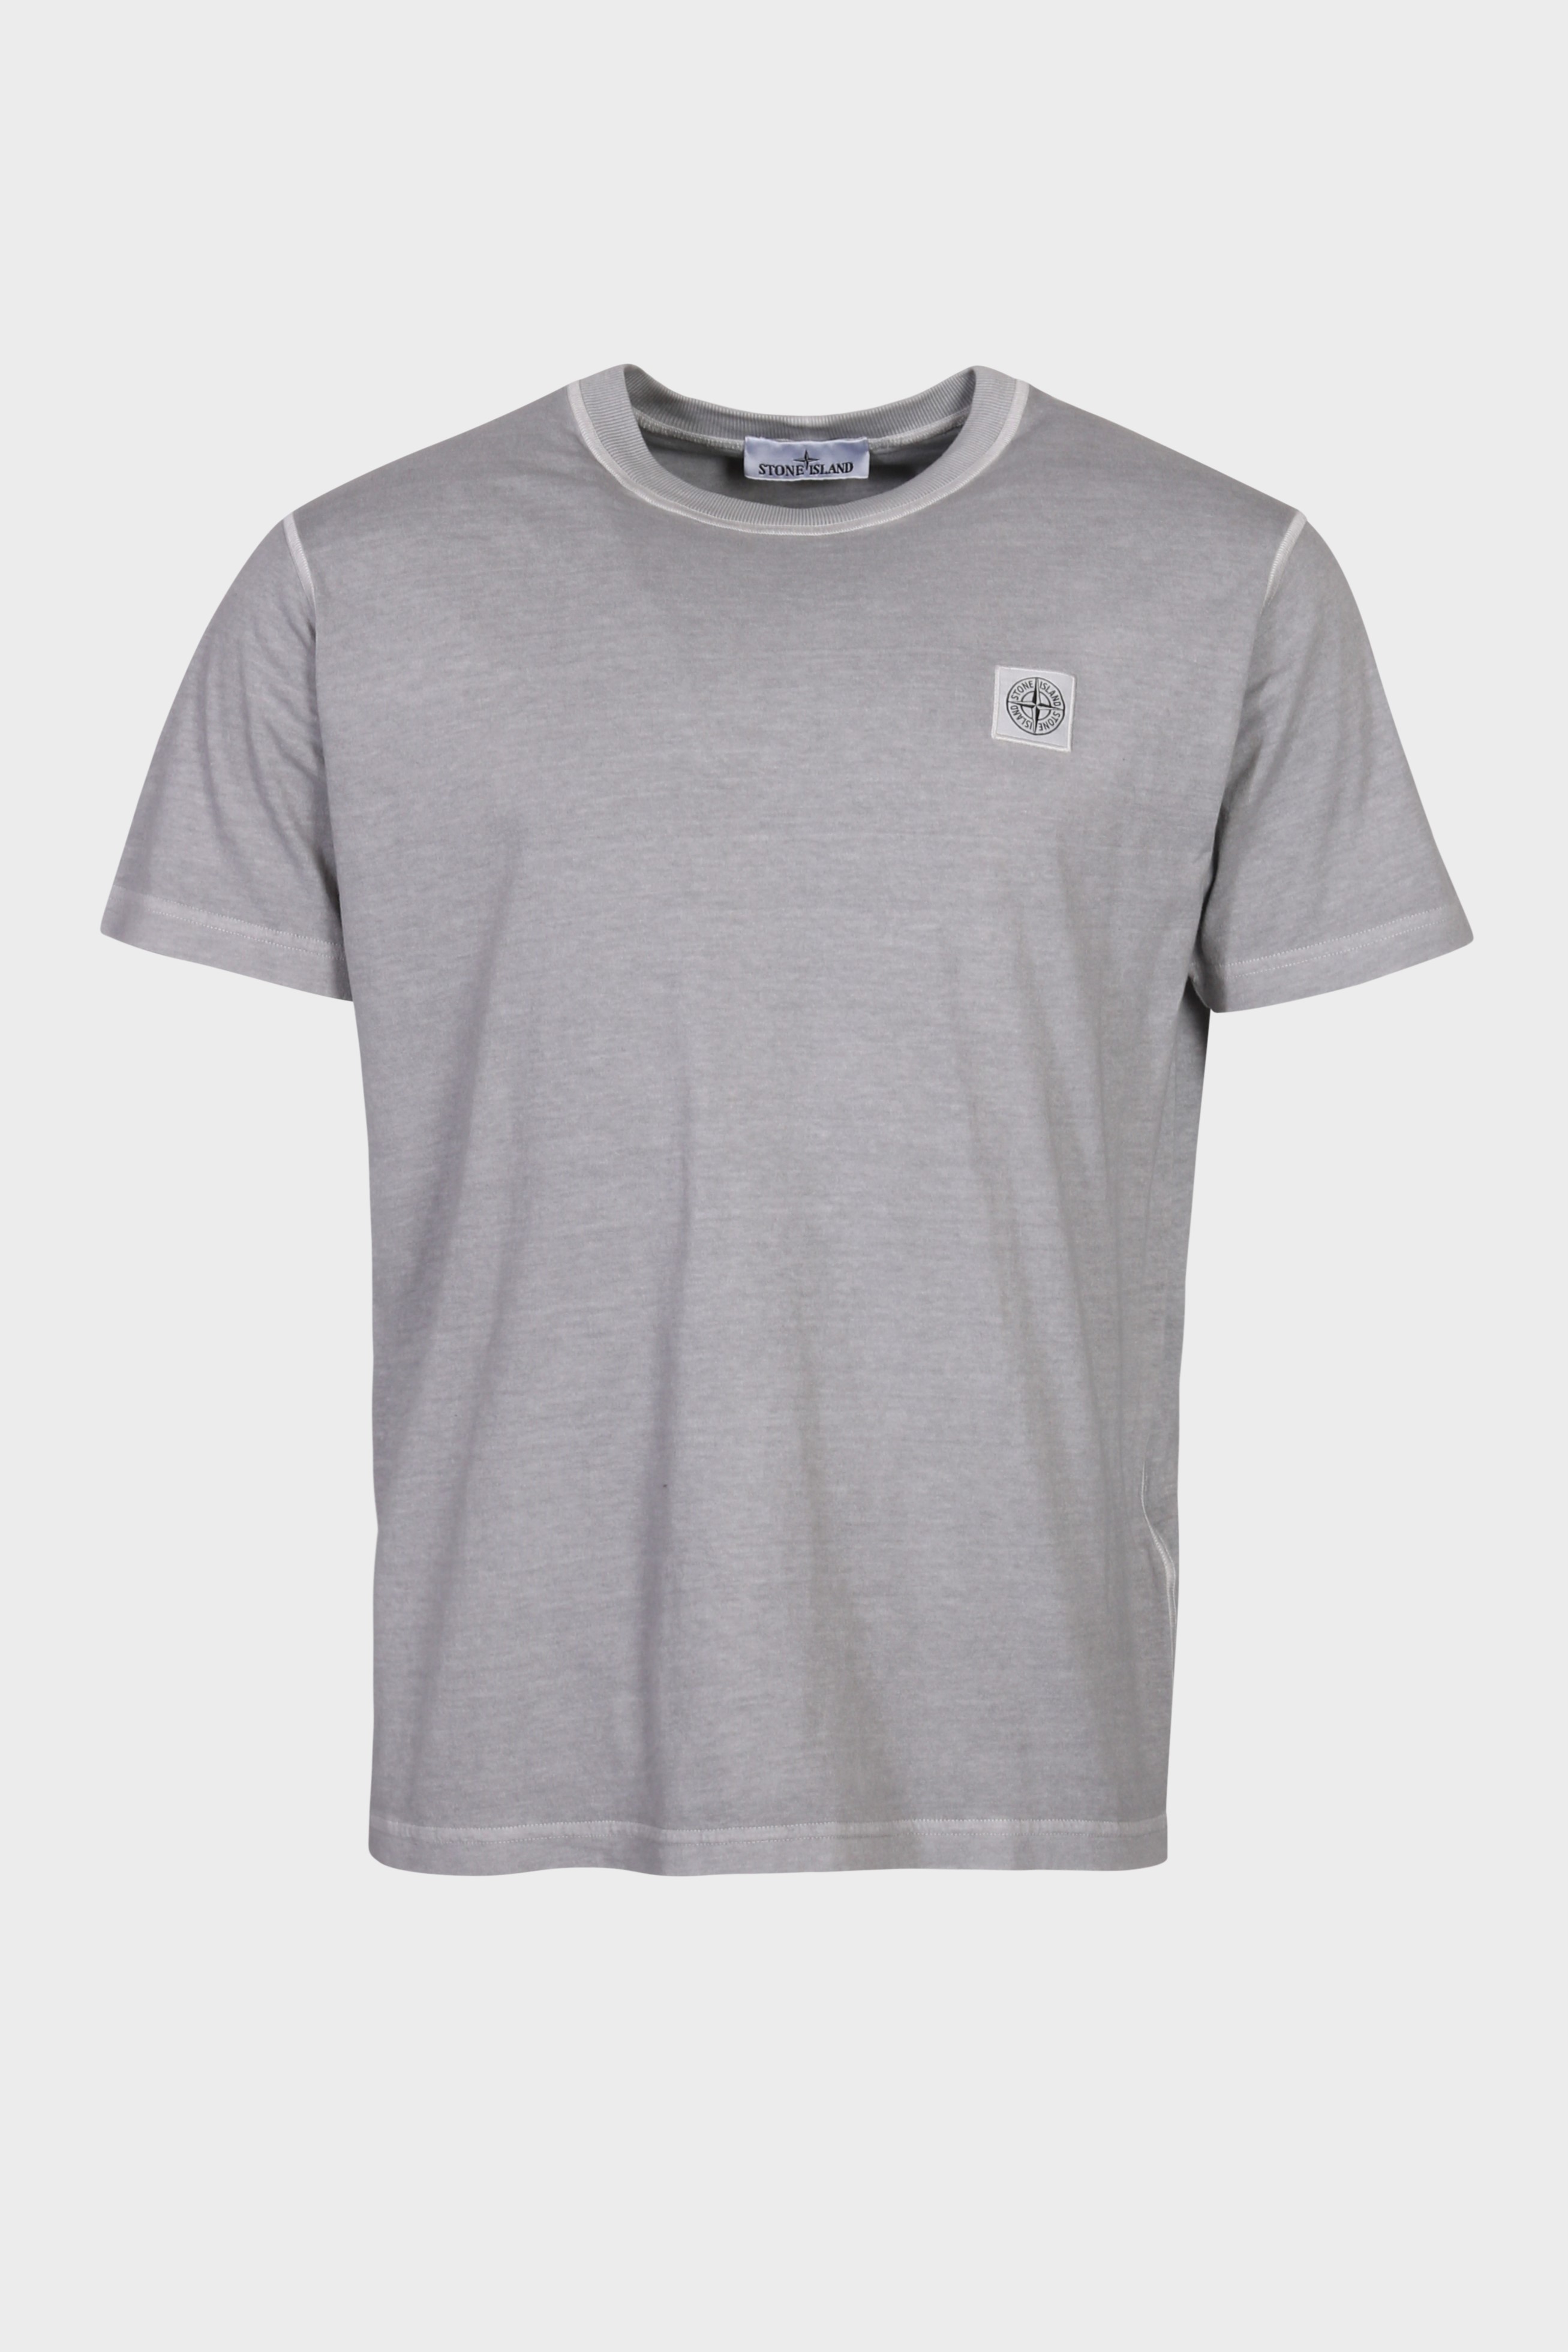 STONE ISLAND T-Shirt in Washed Grey